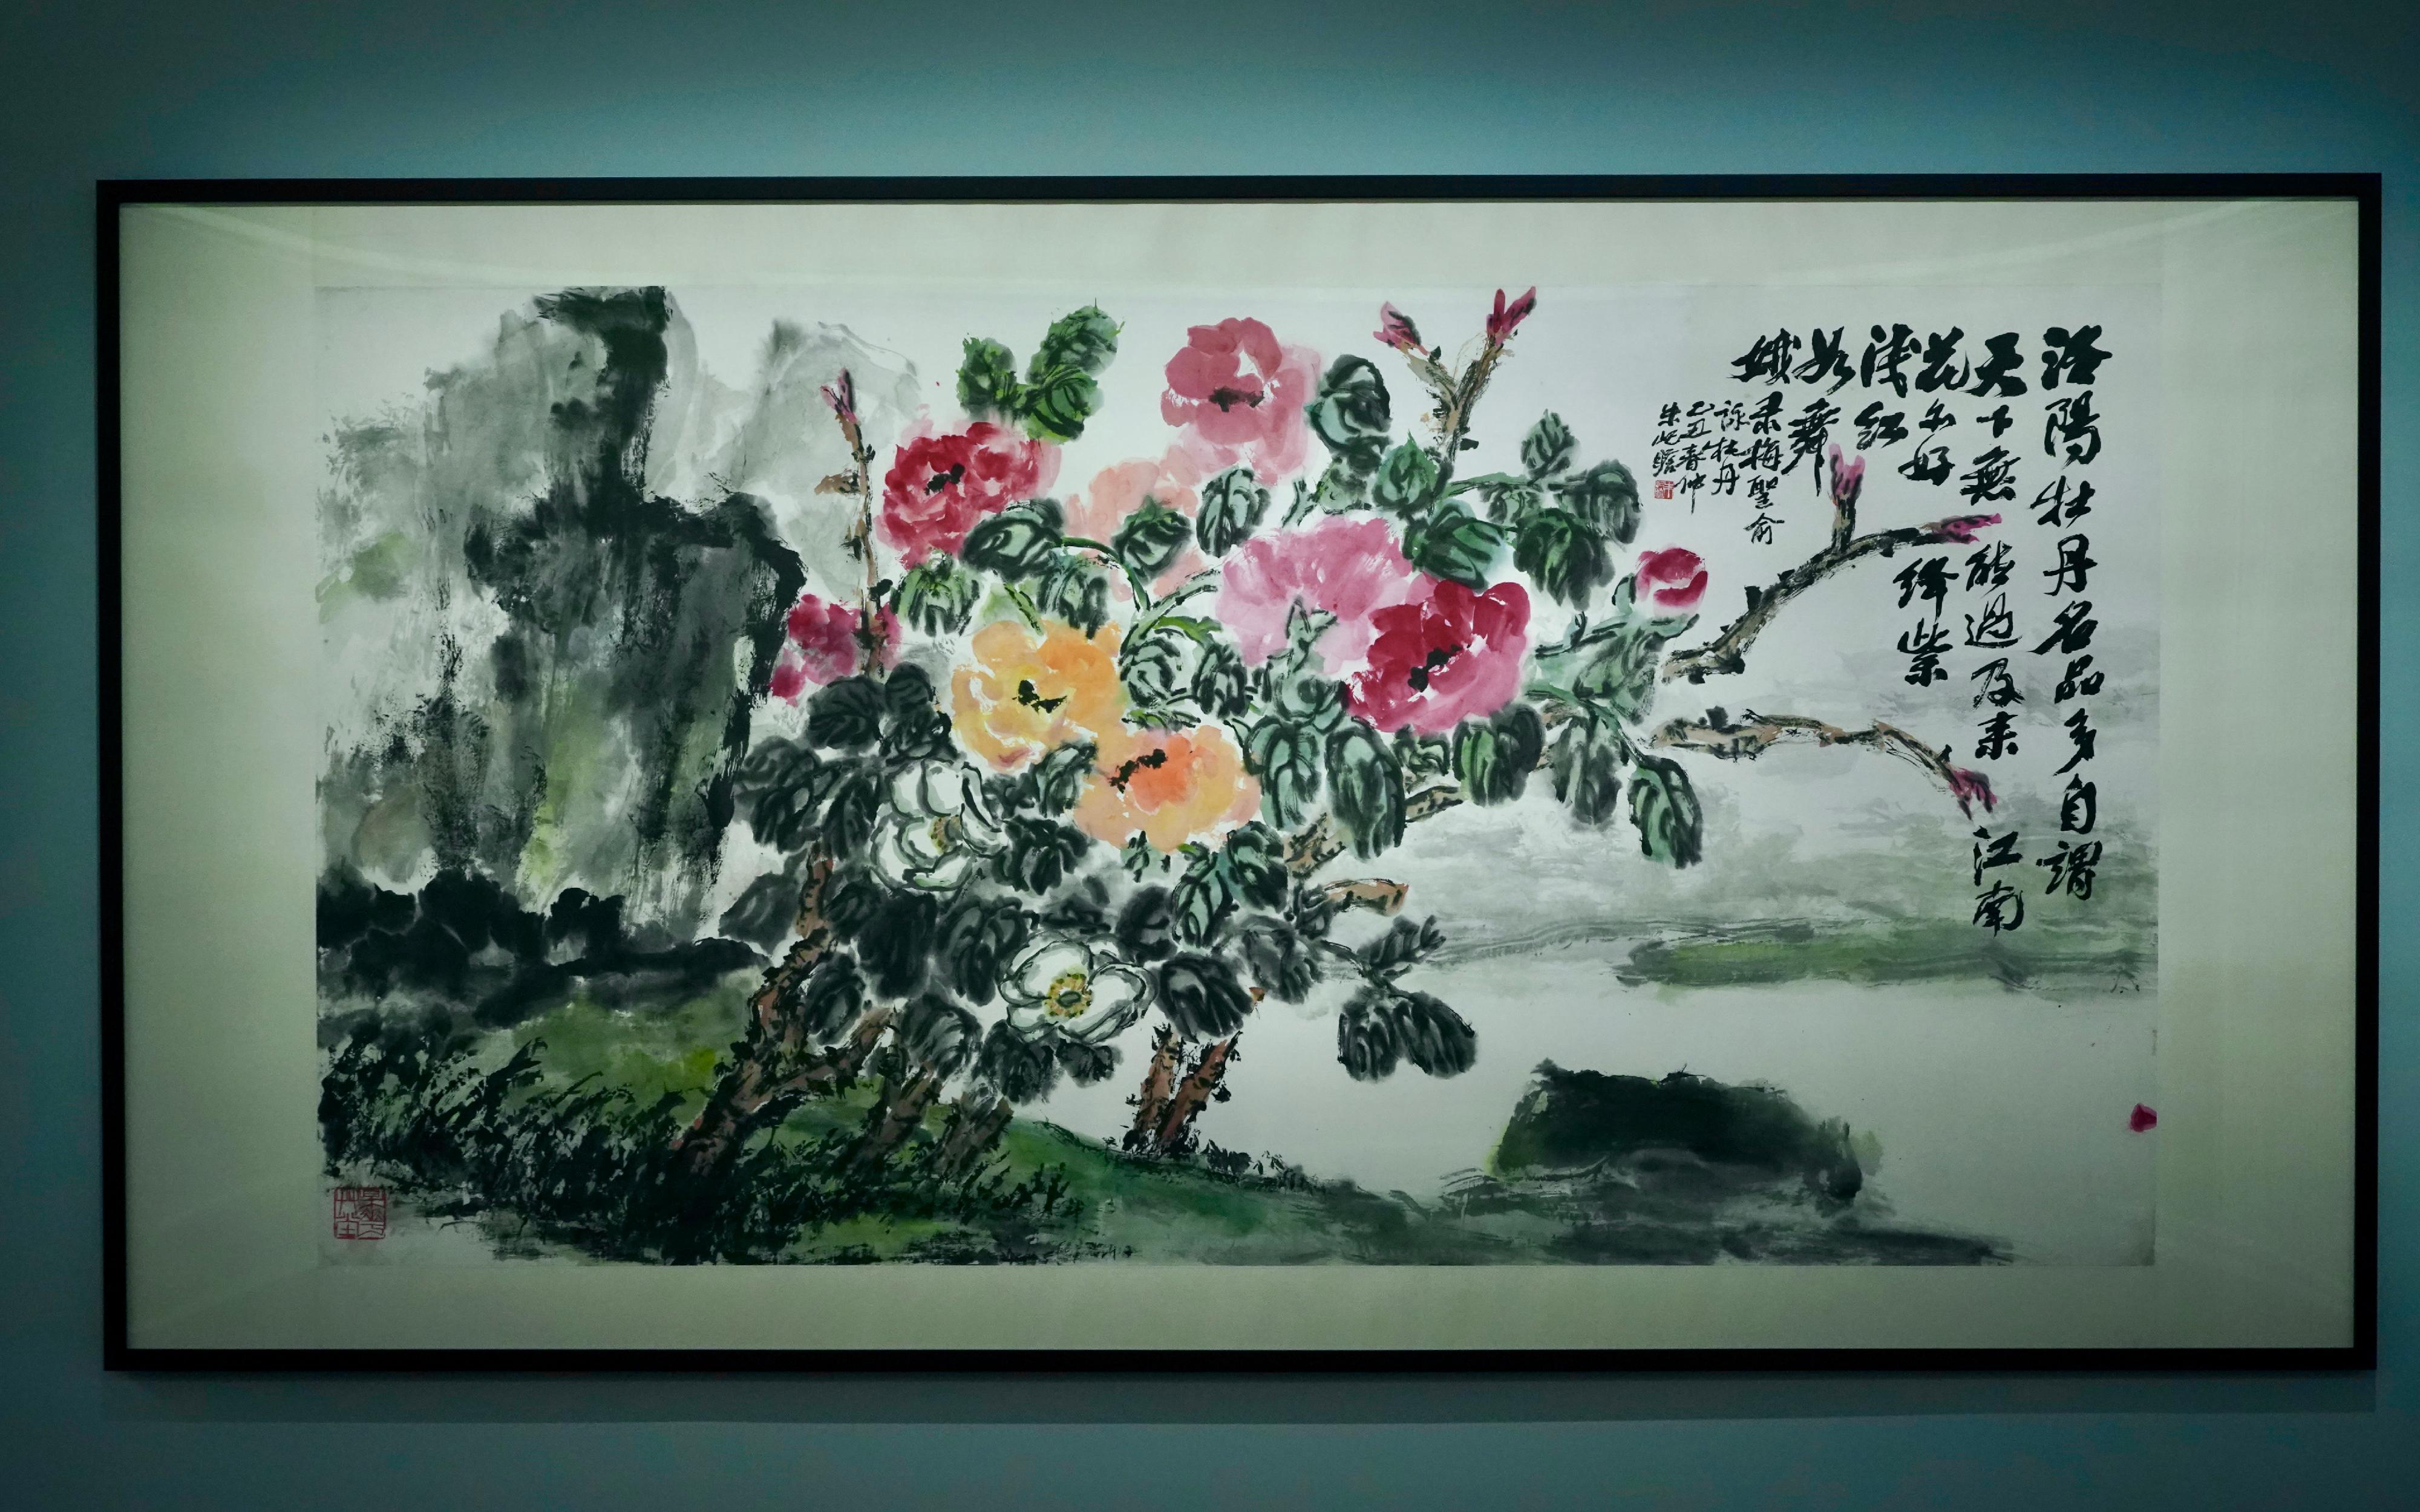 The Hong Kong Museum of Art will launch a new exhibition "Palette of a Centenarian: Selected Works of Zhu Qizhan from the Jingguanlou Collection", to showcase over 80 sets of paintings by Shanghai School Master Zhu Qizhan from different times in his life. Photo shows “Luoyang peonies”.